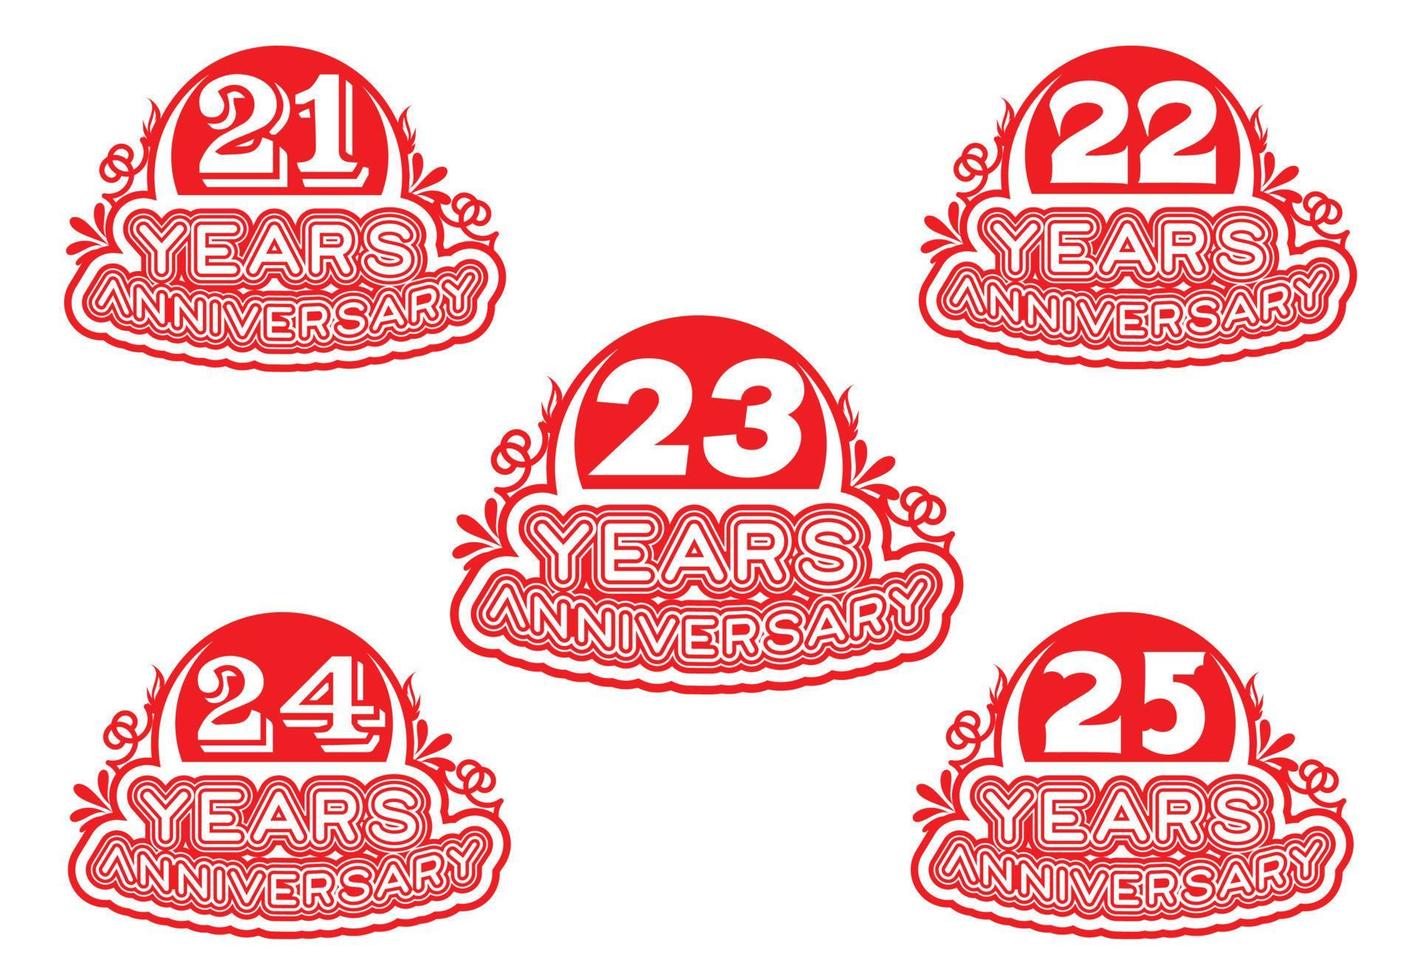 21 to 25 years anniversary logo and sticker design vector